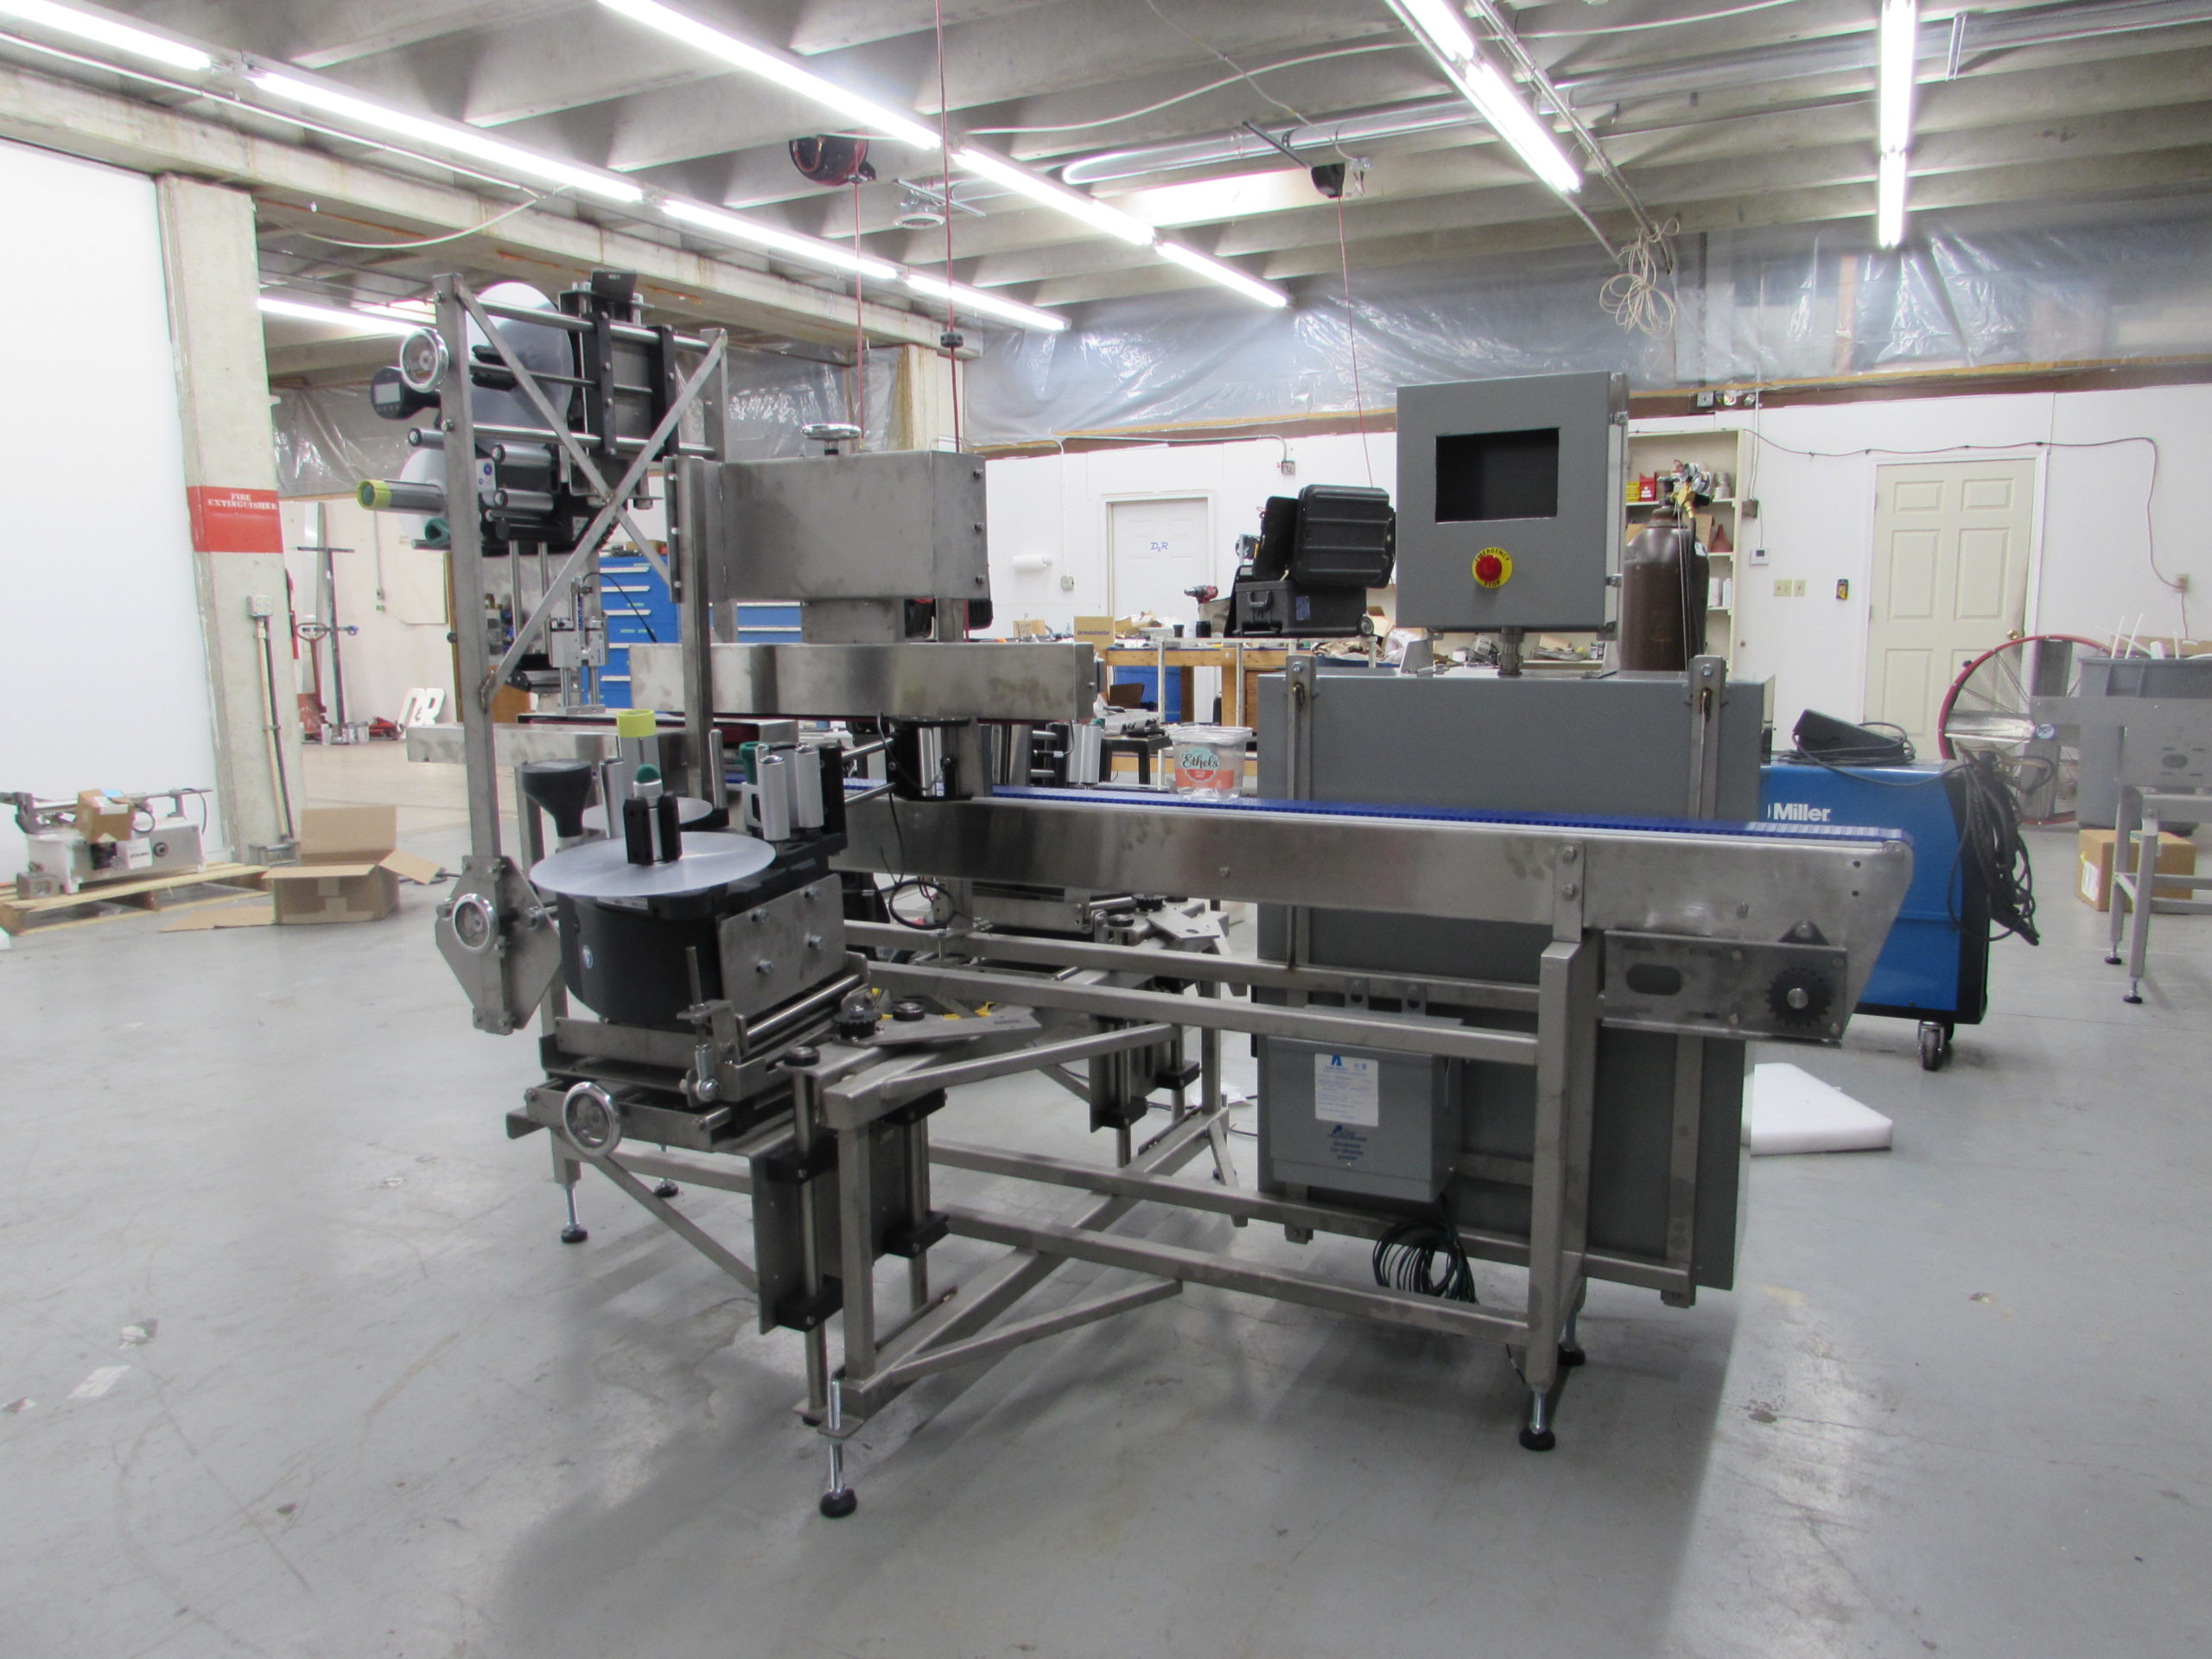 3cnt Packing Line for Bakery Products, D&R packaging, custom machinery, stainless steel, product labeling, product handling,